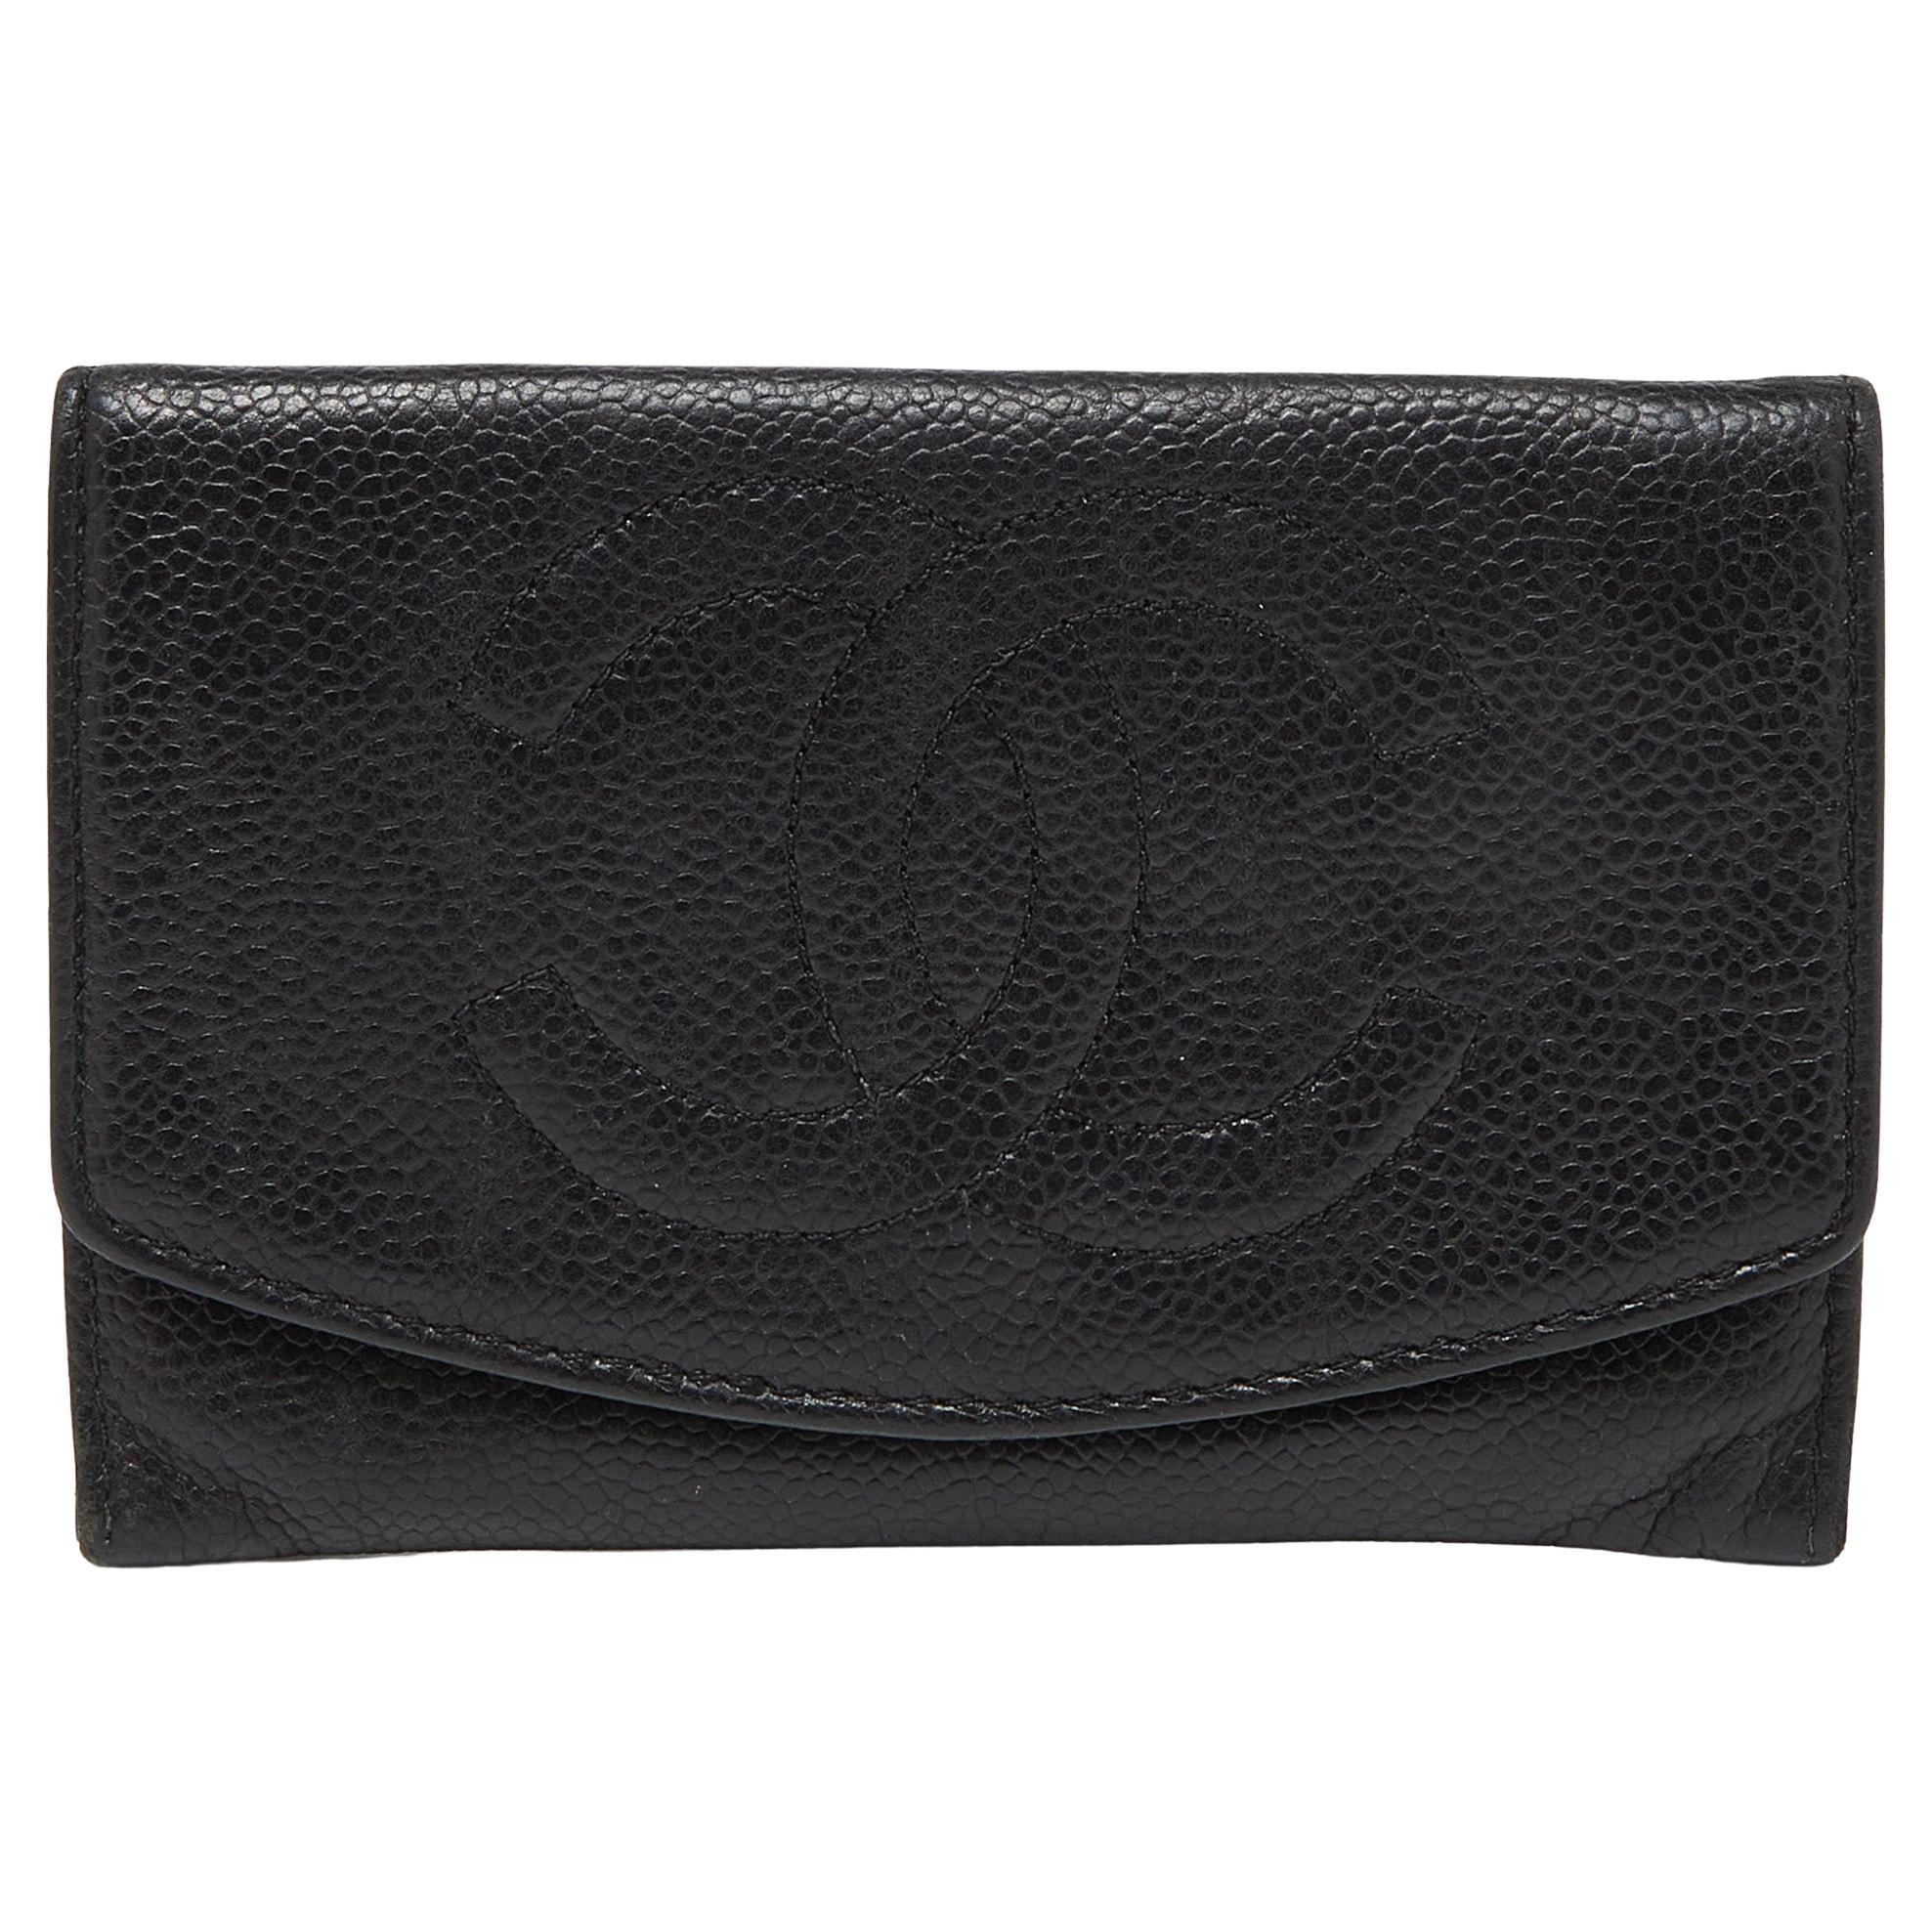 Chanel Black Caviar Leather CC Timeless Continental Wallet For Sale